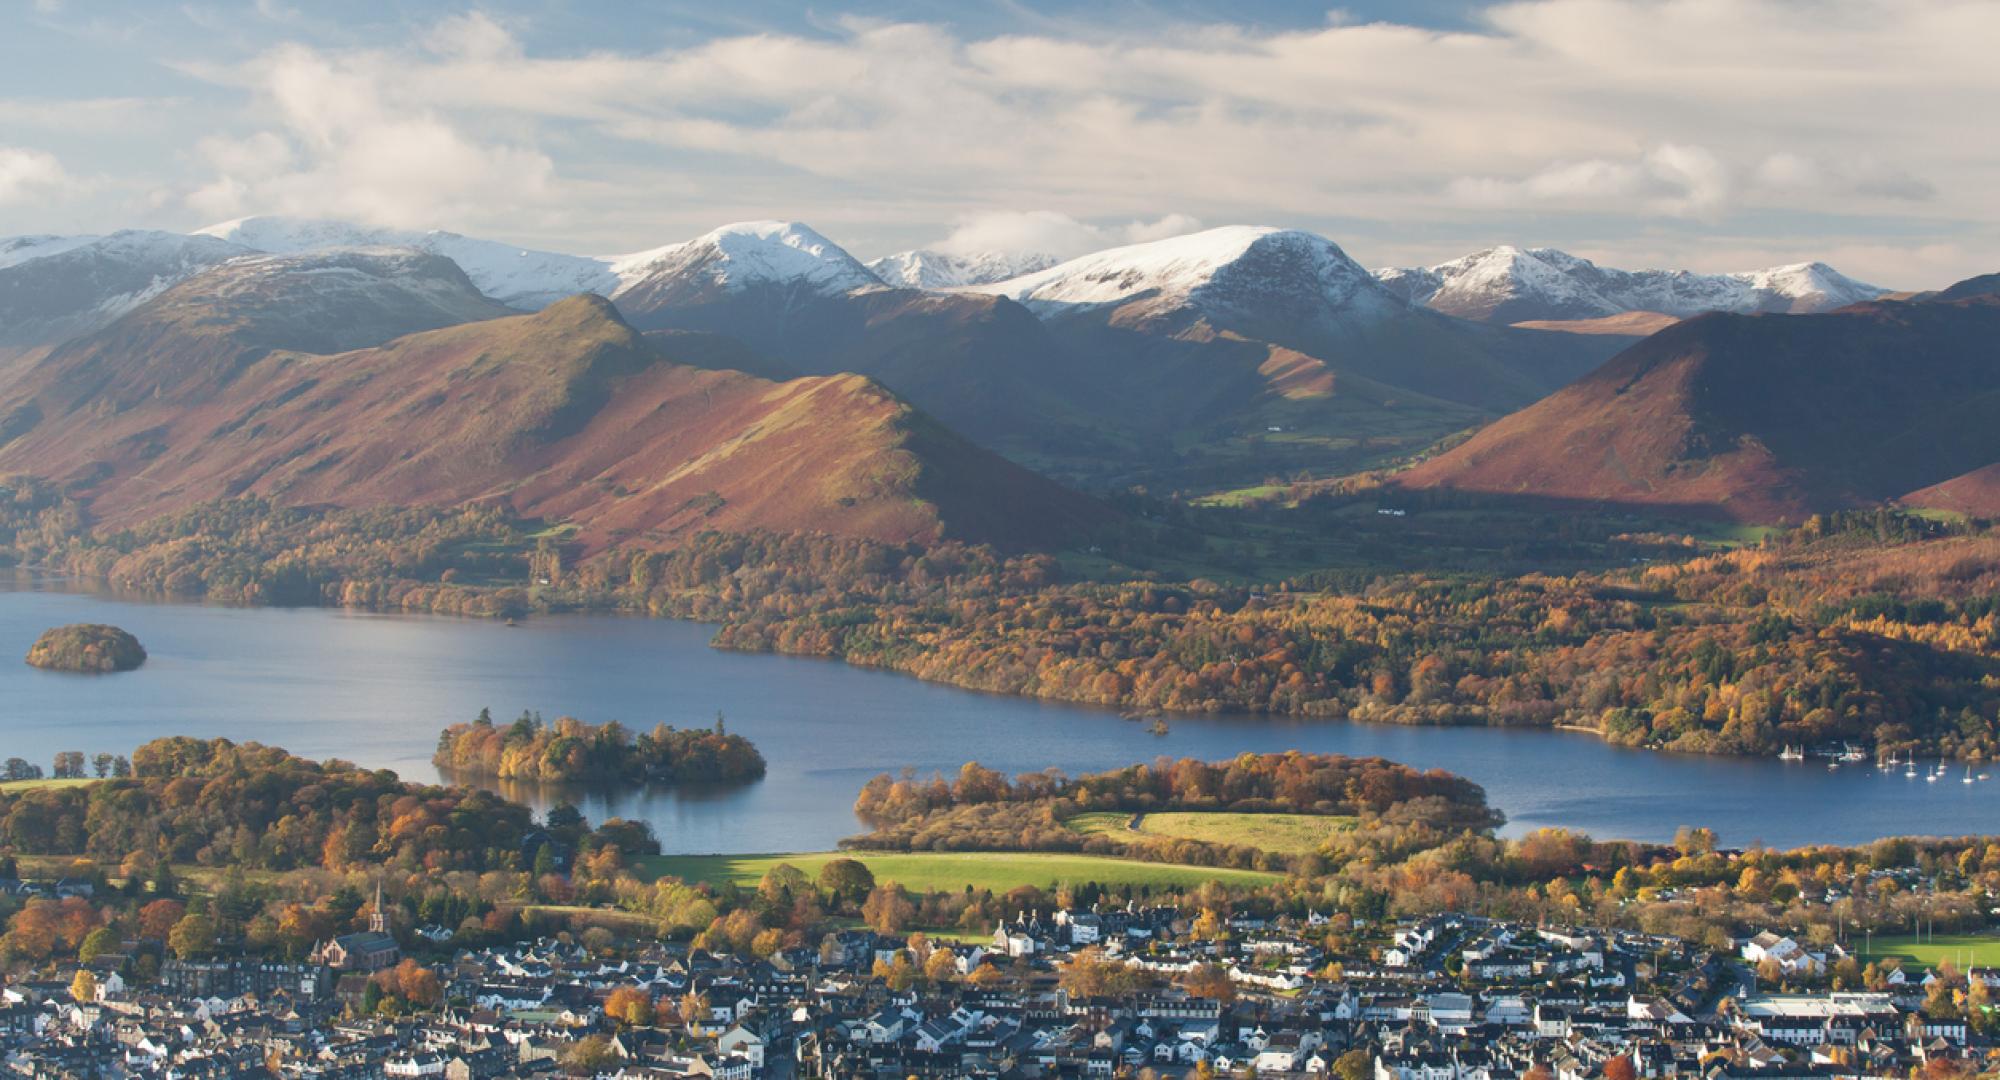 view of Keswick, Derwent Water and the surrounding fells.